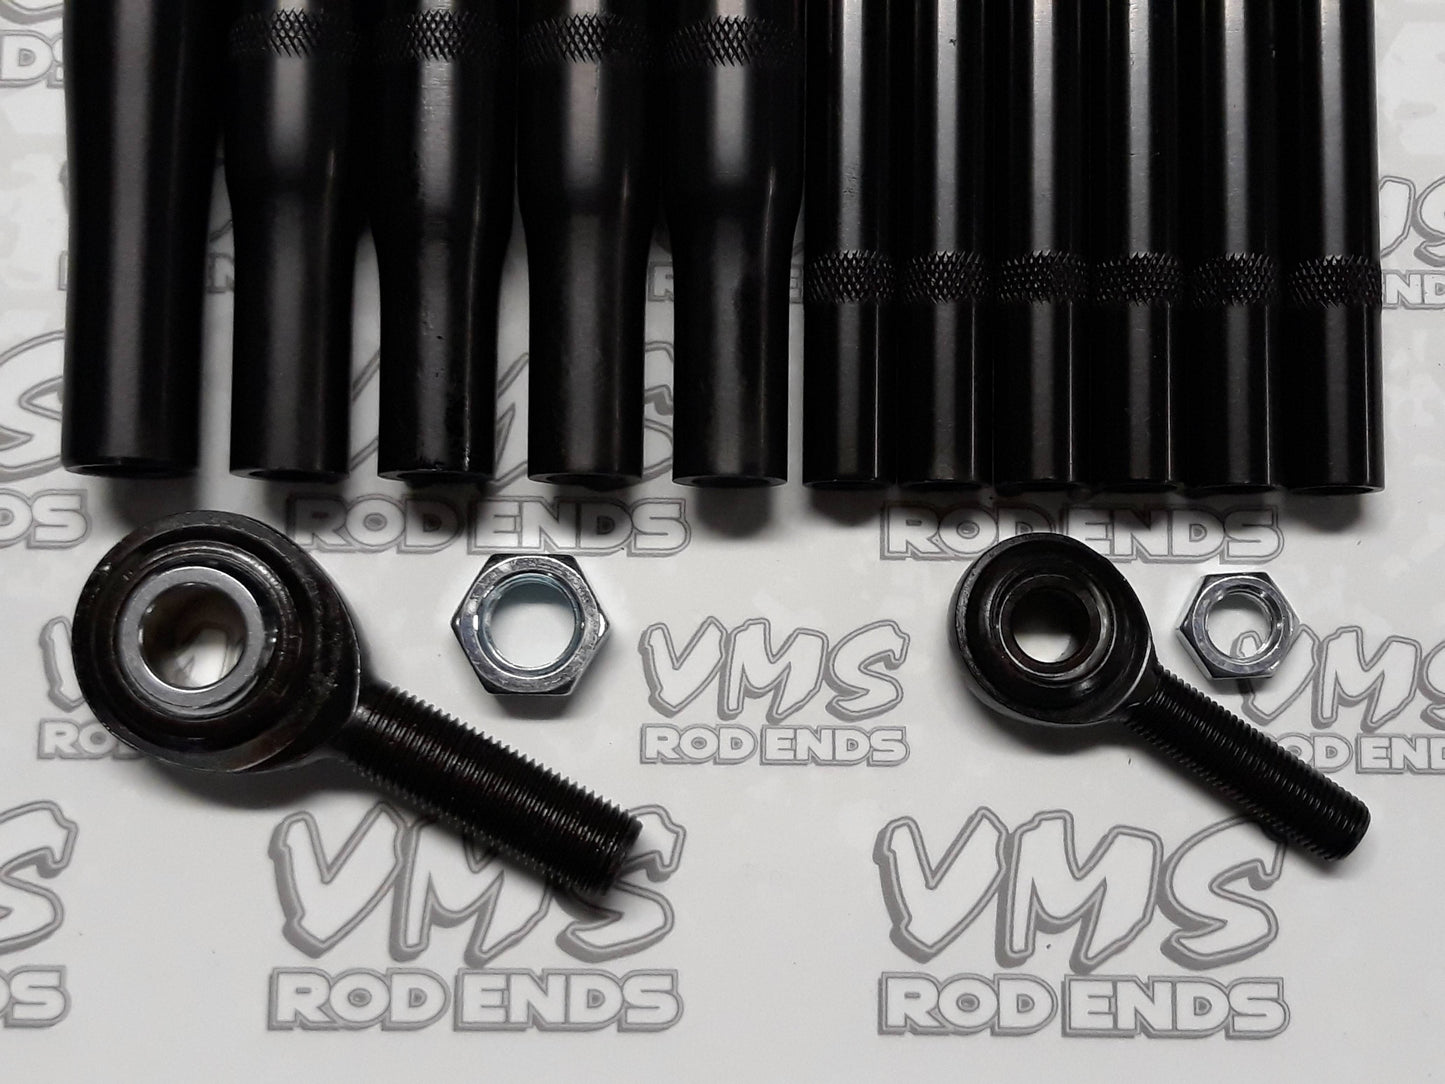 Bandolero Complete Set of Rod & Rod Ends w/ B Series Rod Ends and Black Rods